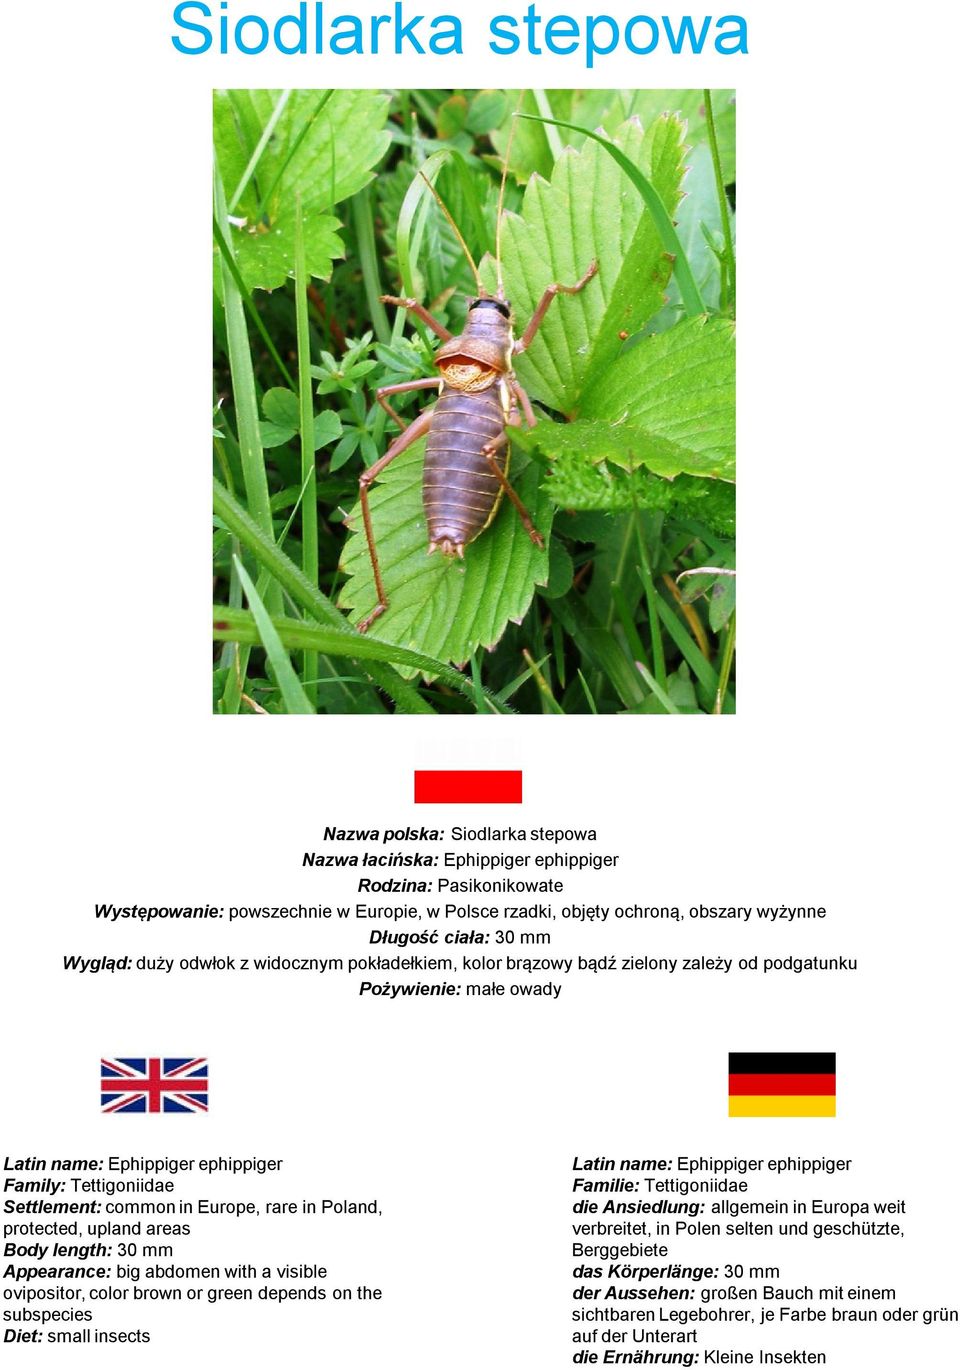 Settlement: common in Europe, rare in Poland, protected, upland areas Body length: 30 mm Appearance: big abdomen with a visible ovipositor, color brown or green depends on the subspecies Diet: small